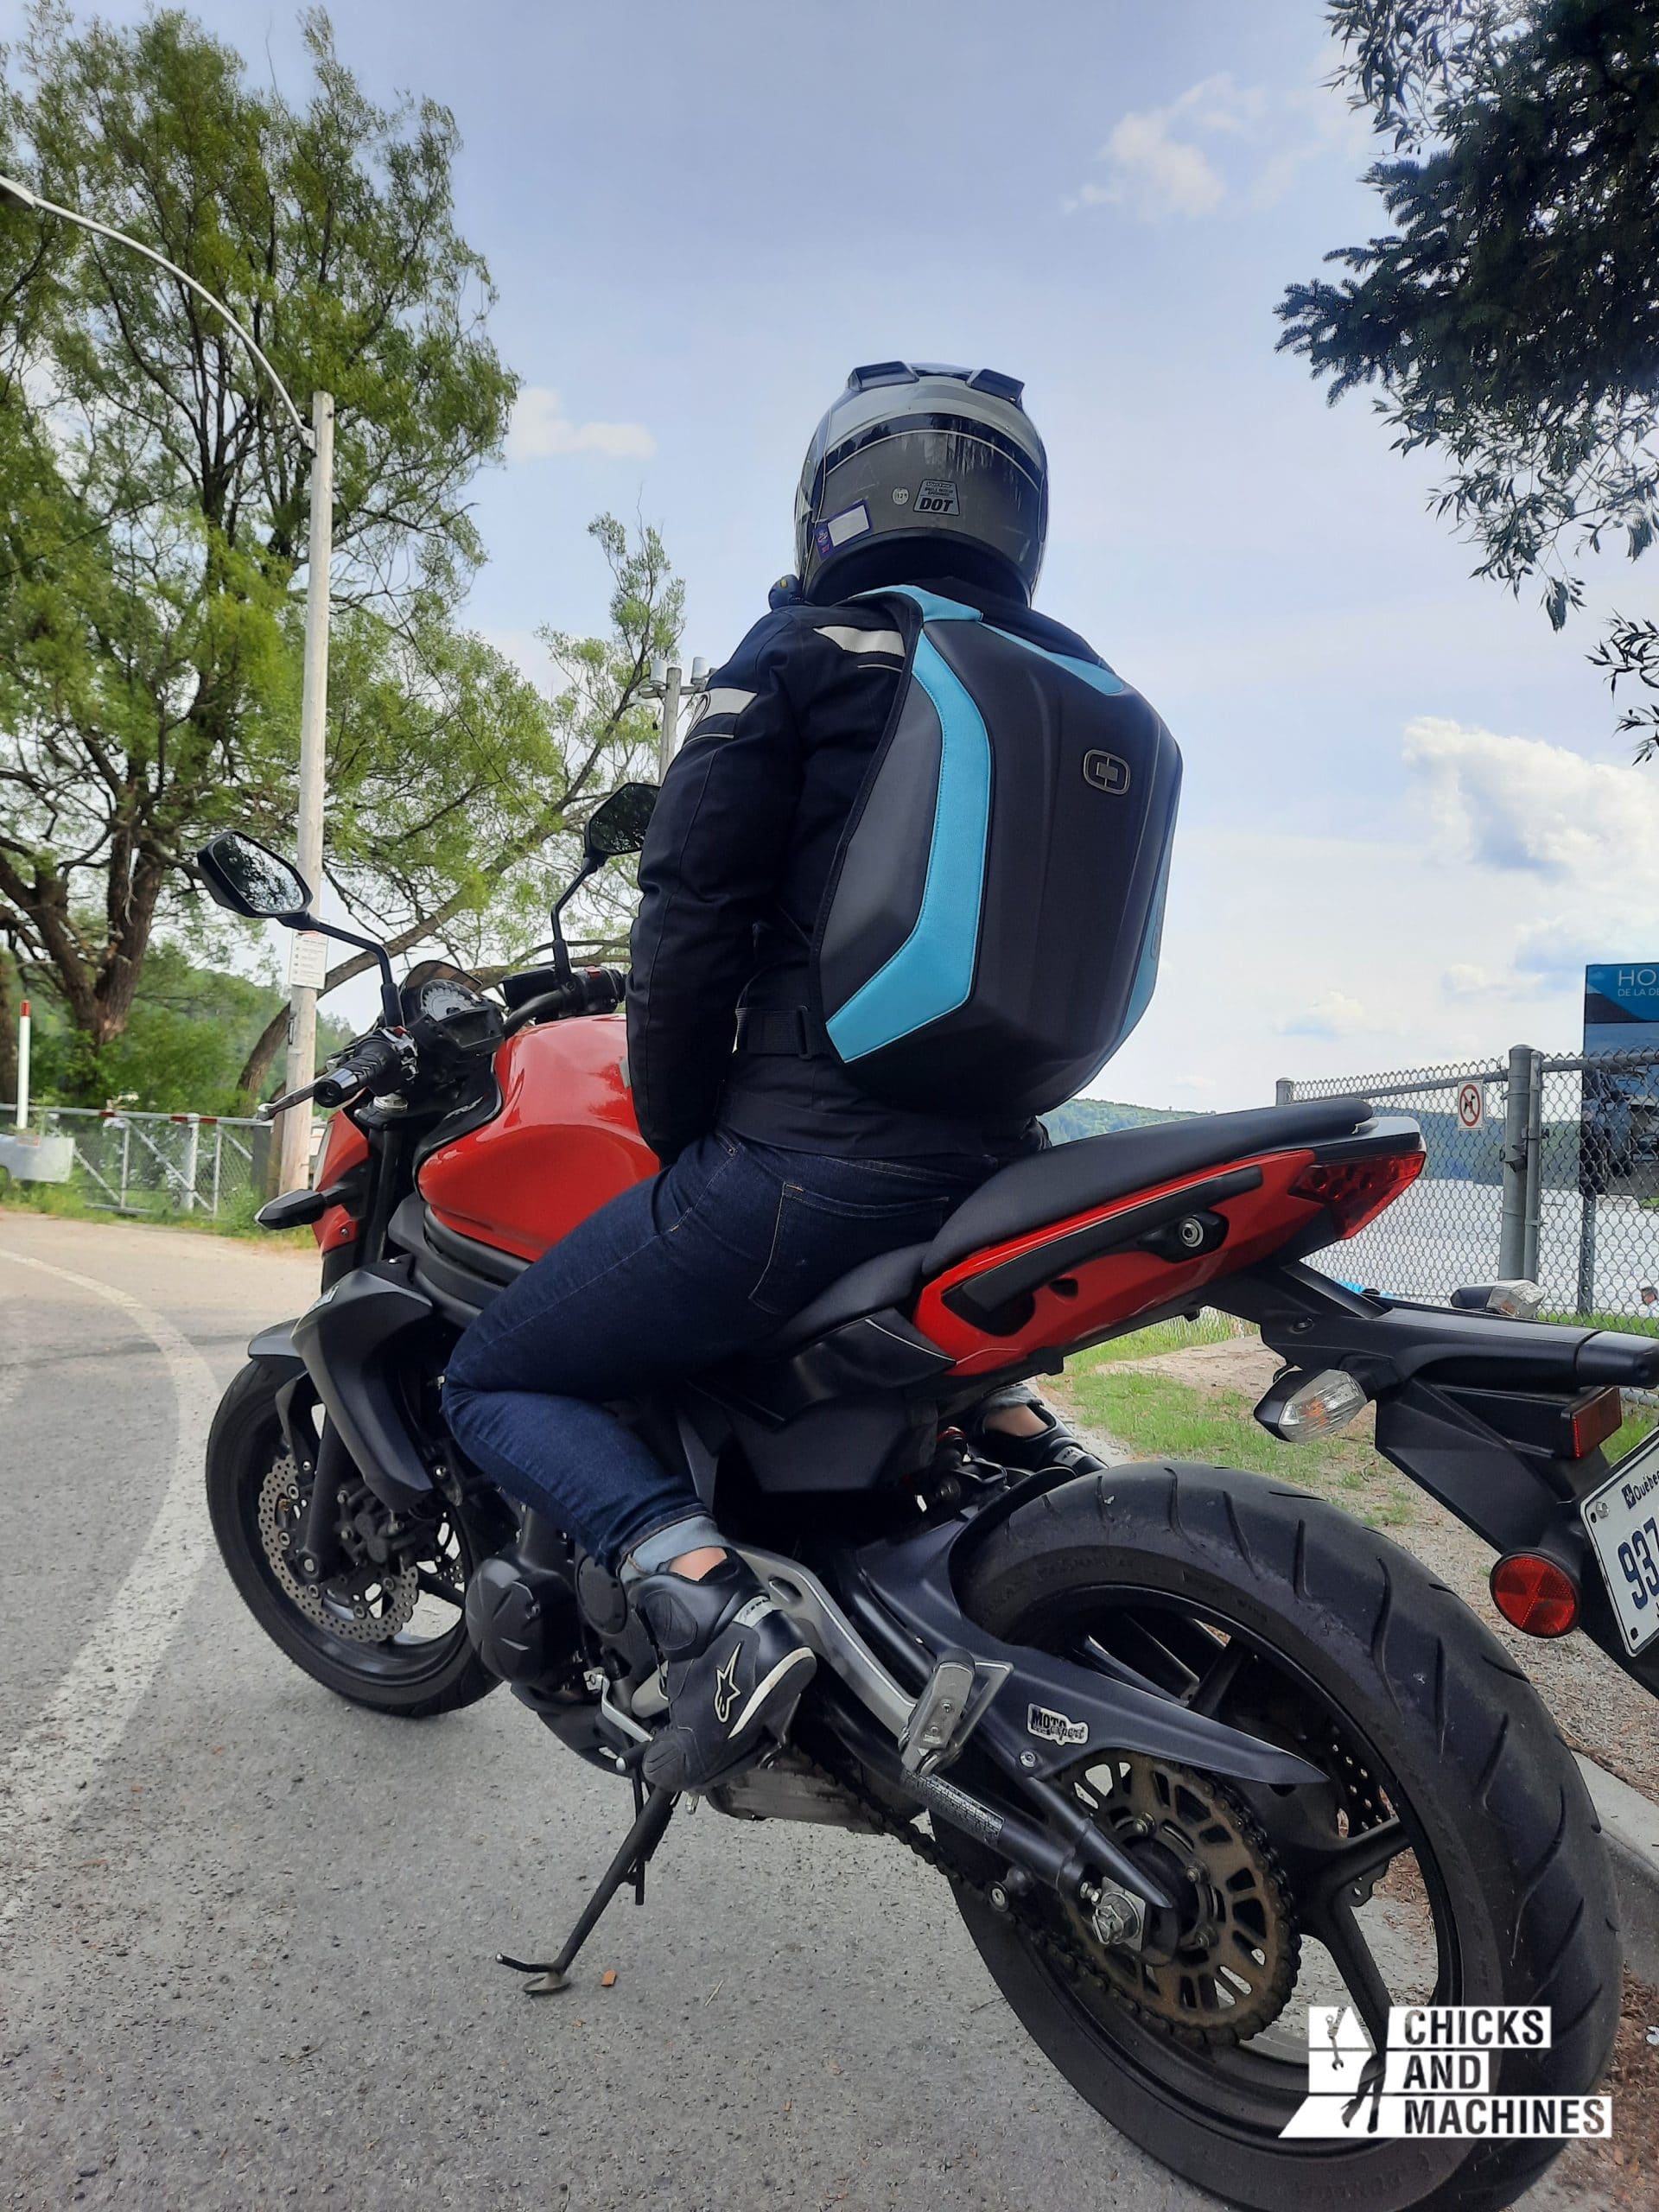 Cyndie ready for a motorcycle ride with her new OGIO Mach 3S LE bag!